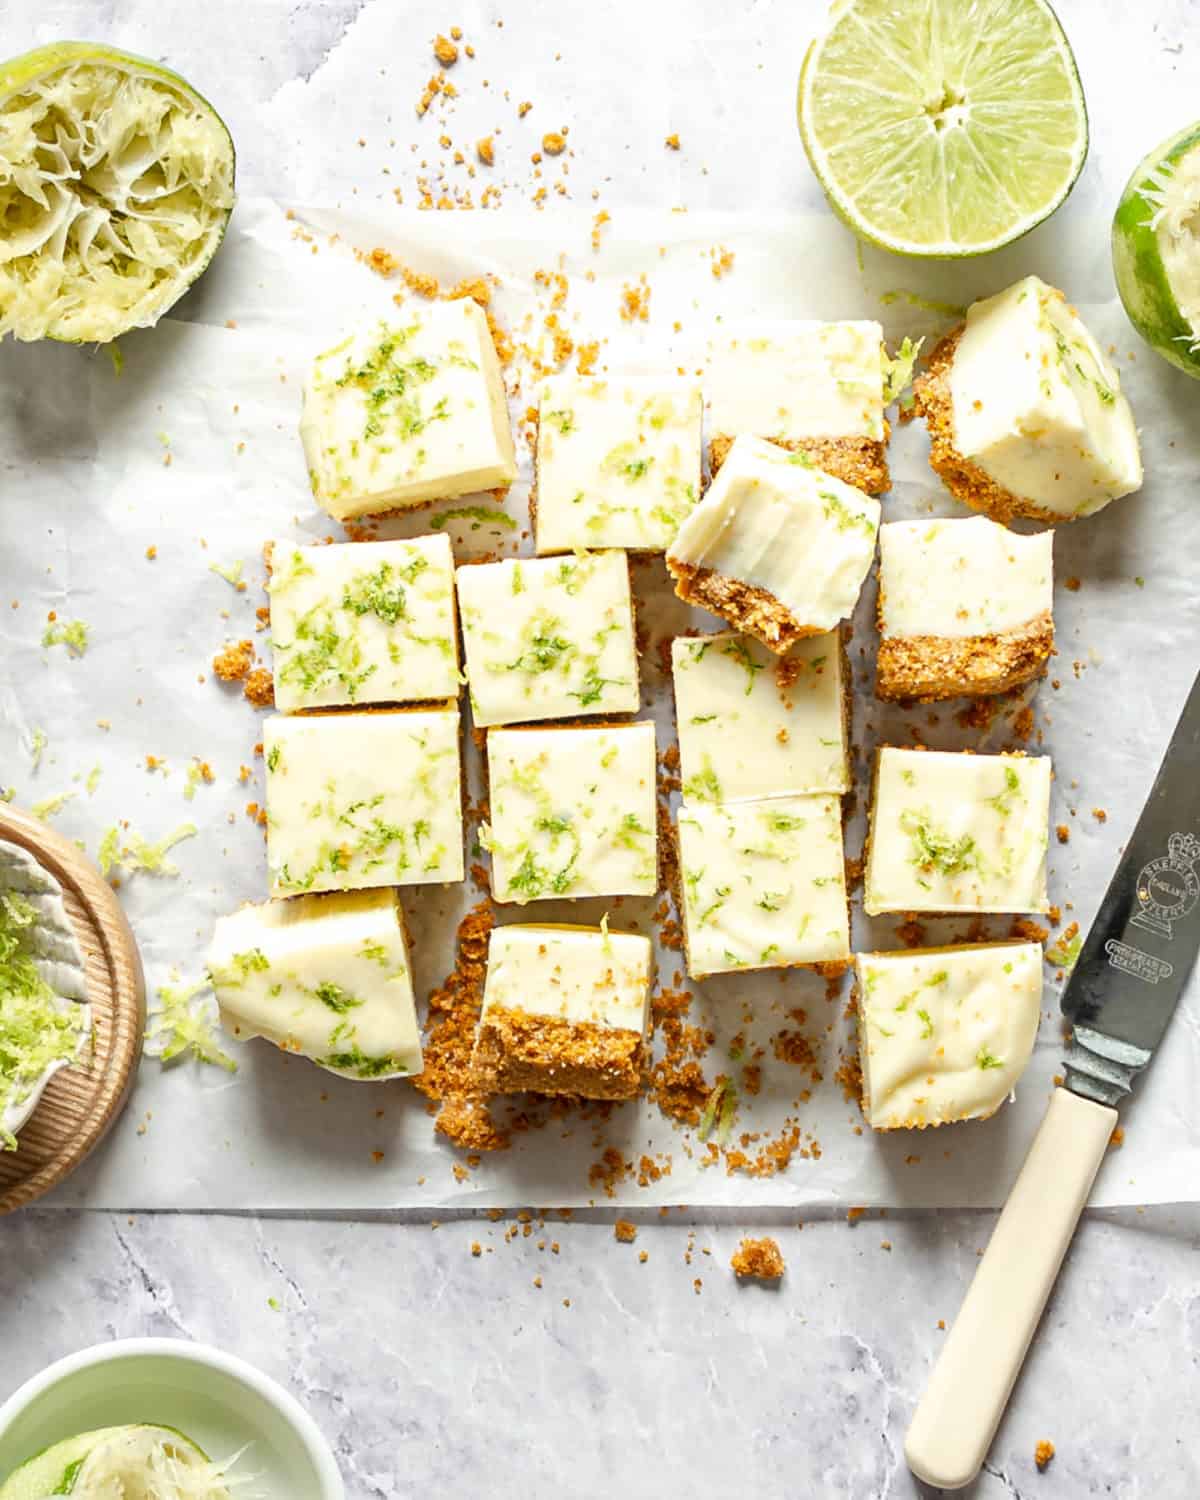 Key lime fudge squares on a table with limes and a knife.